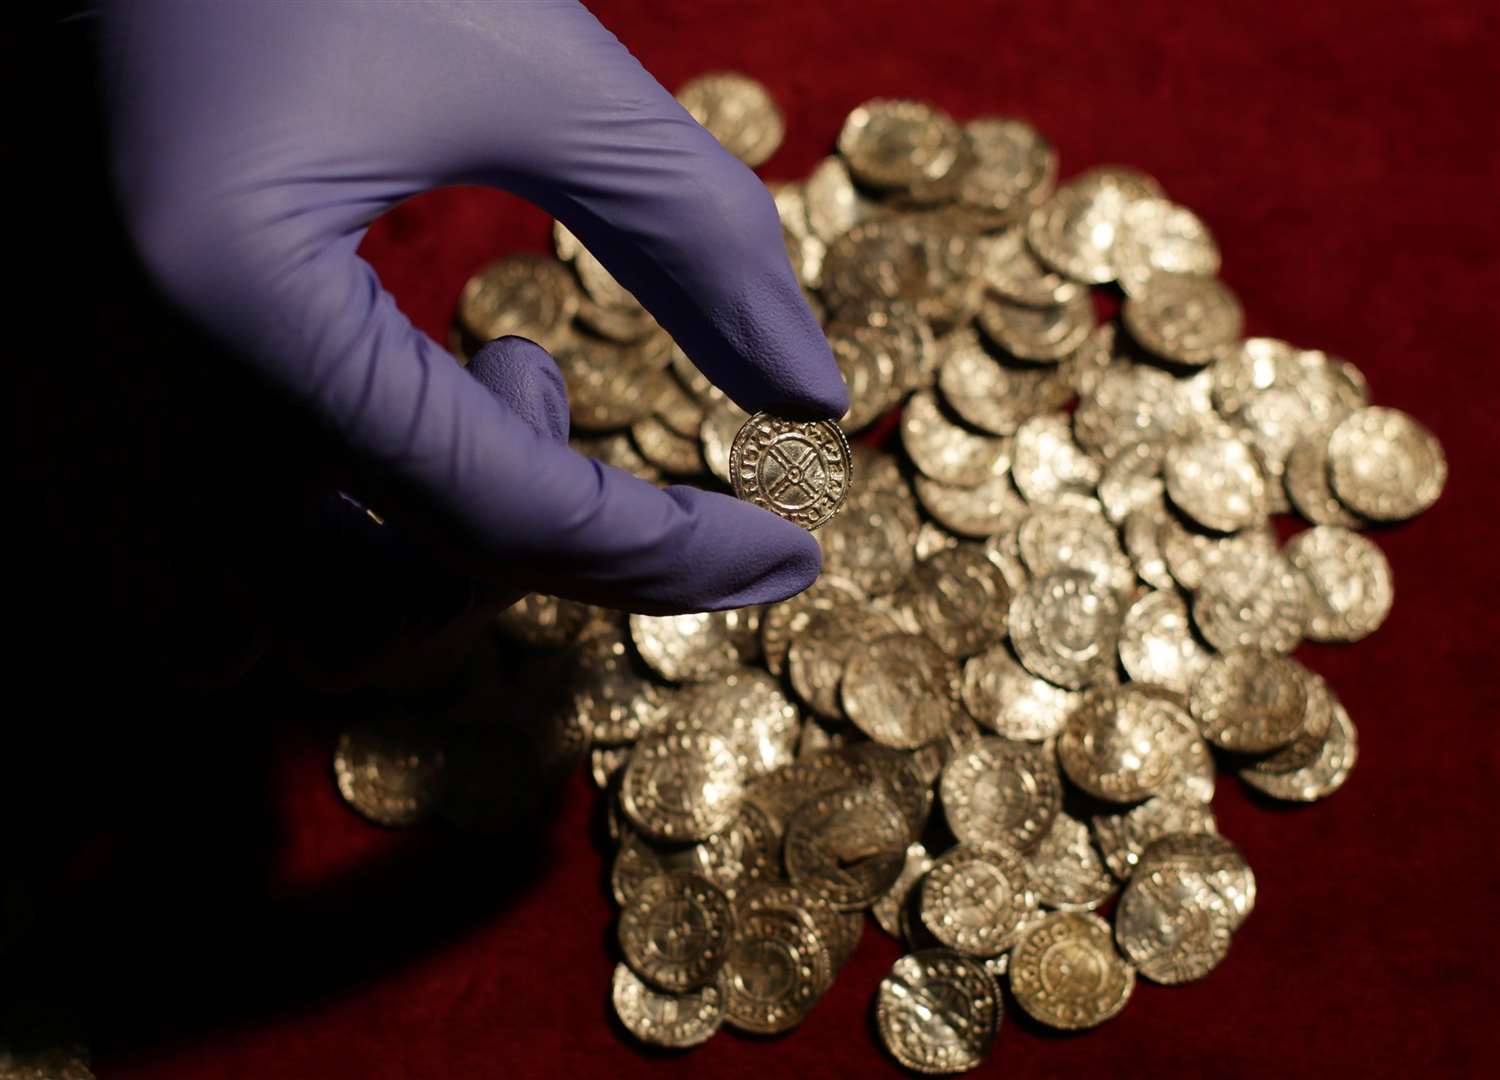 Some of the 5,200 coins discovered in the village of Lenborough, Buckinghamshire, the largest Anglo Saxon coin hoard found since the Treasure Act of 1996. Photo credit Yui Mok/PA Wire